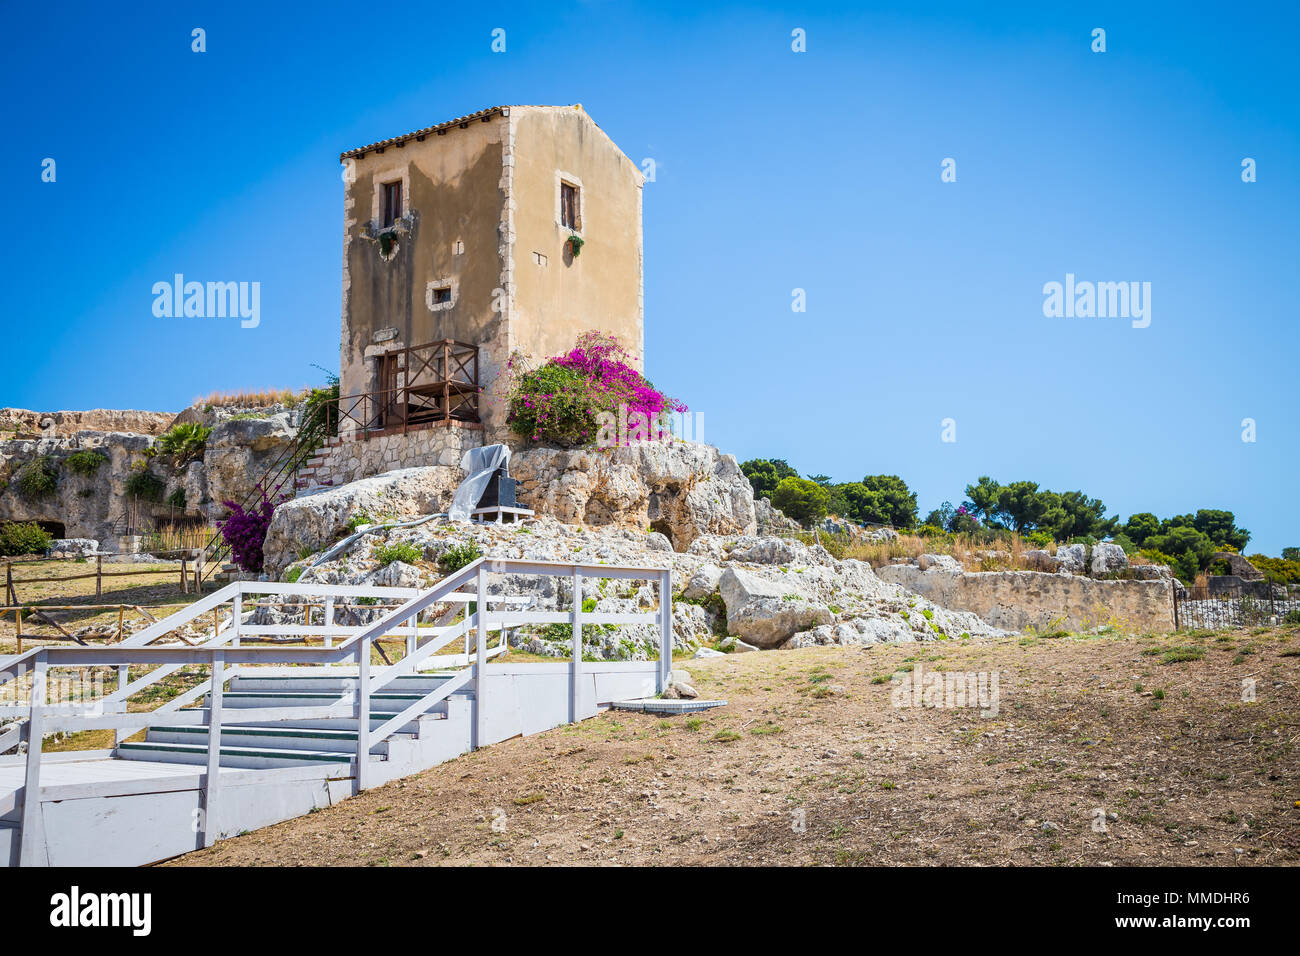 Traditional old Sicilian house during a sunny day with a wonderful blue sky background. Stock Photo